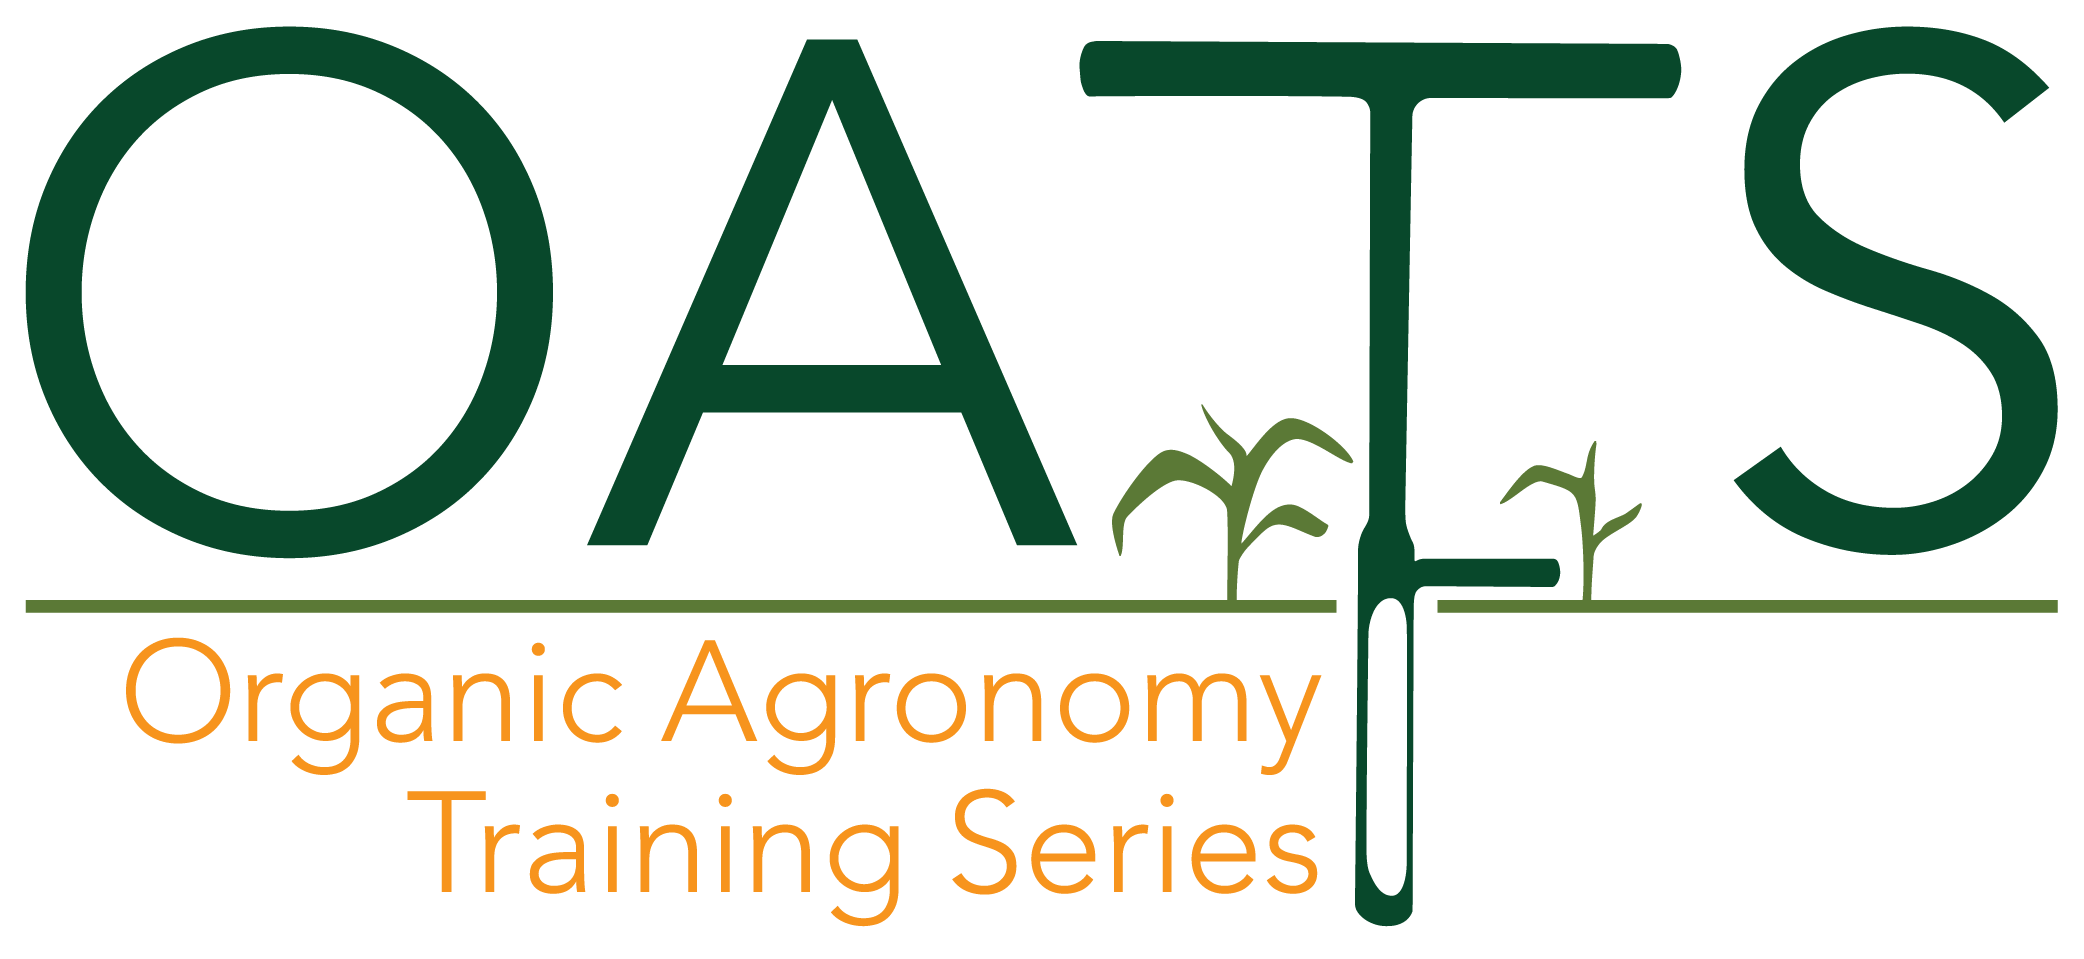 Agronomy Logo - Organic Agronomy Training Series (OATS) | The Land Connection